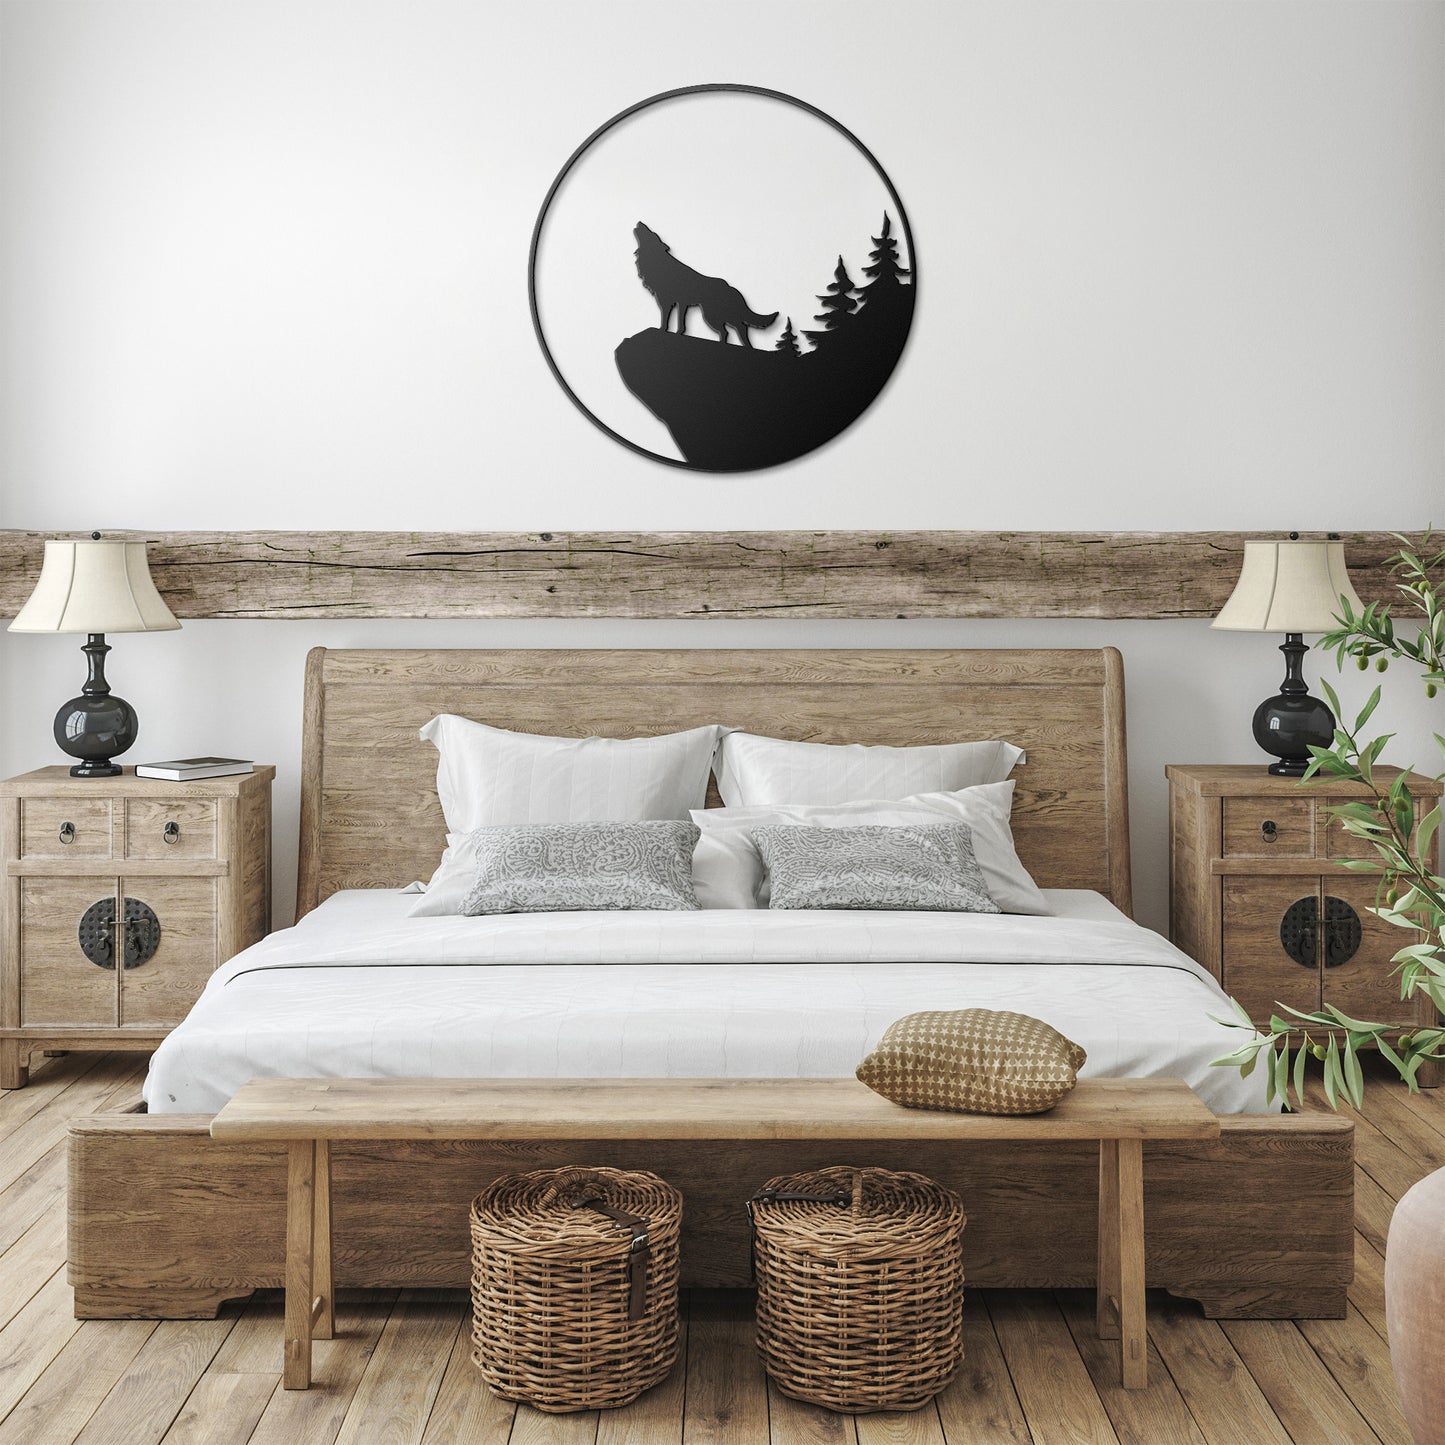 Wolf Howling At The Moon Metal Wall Art